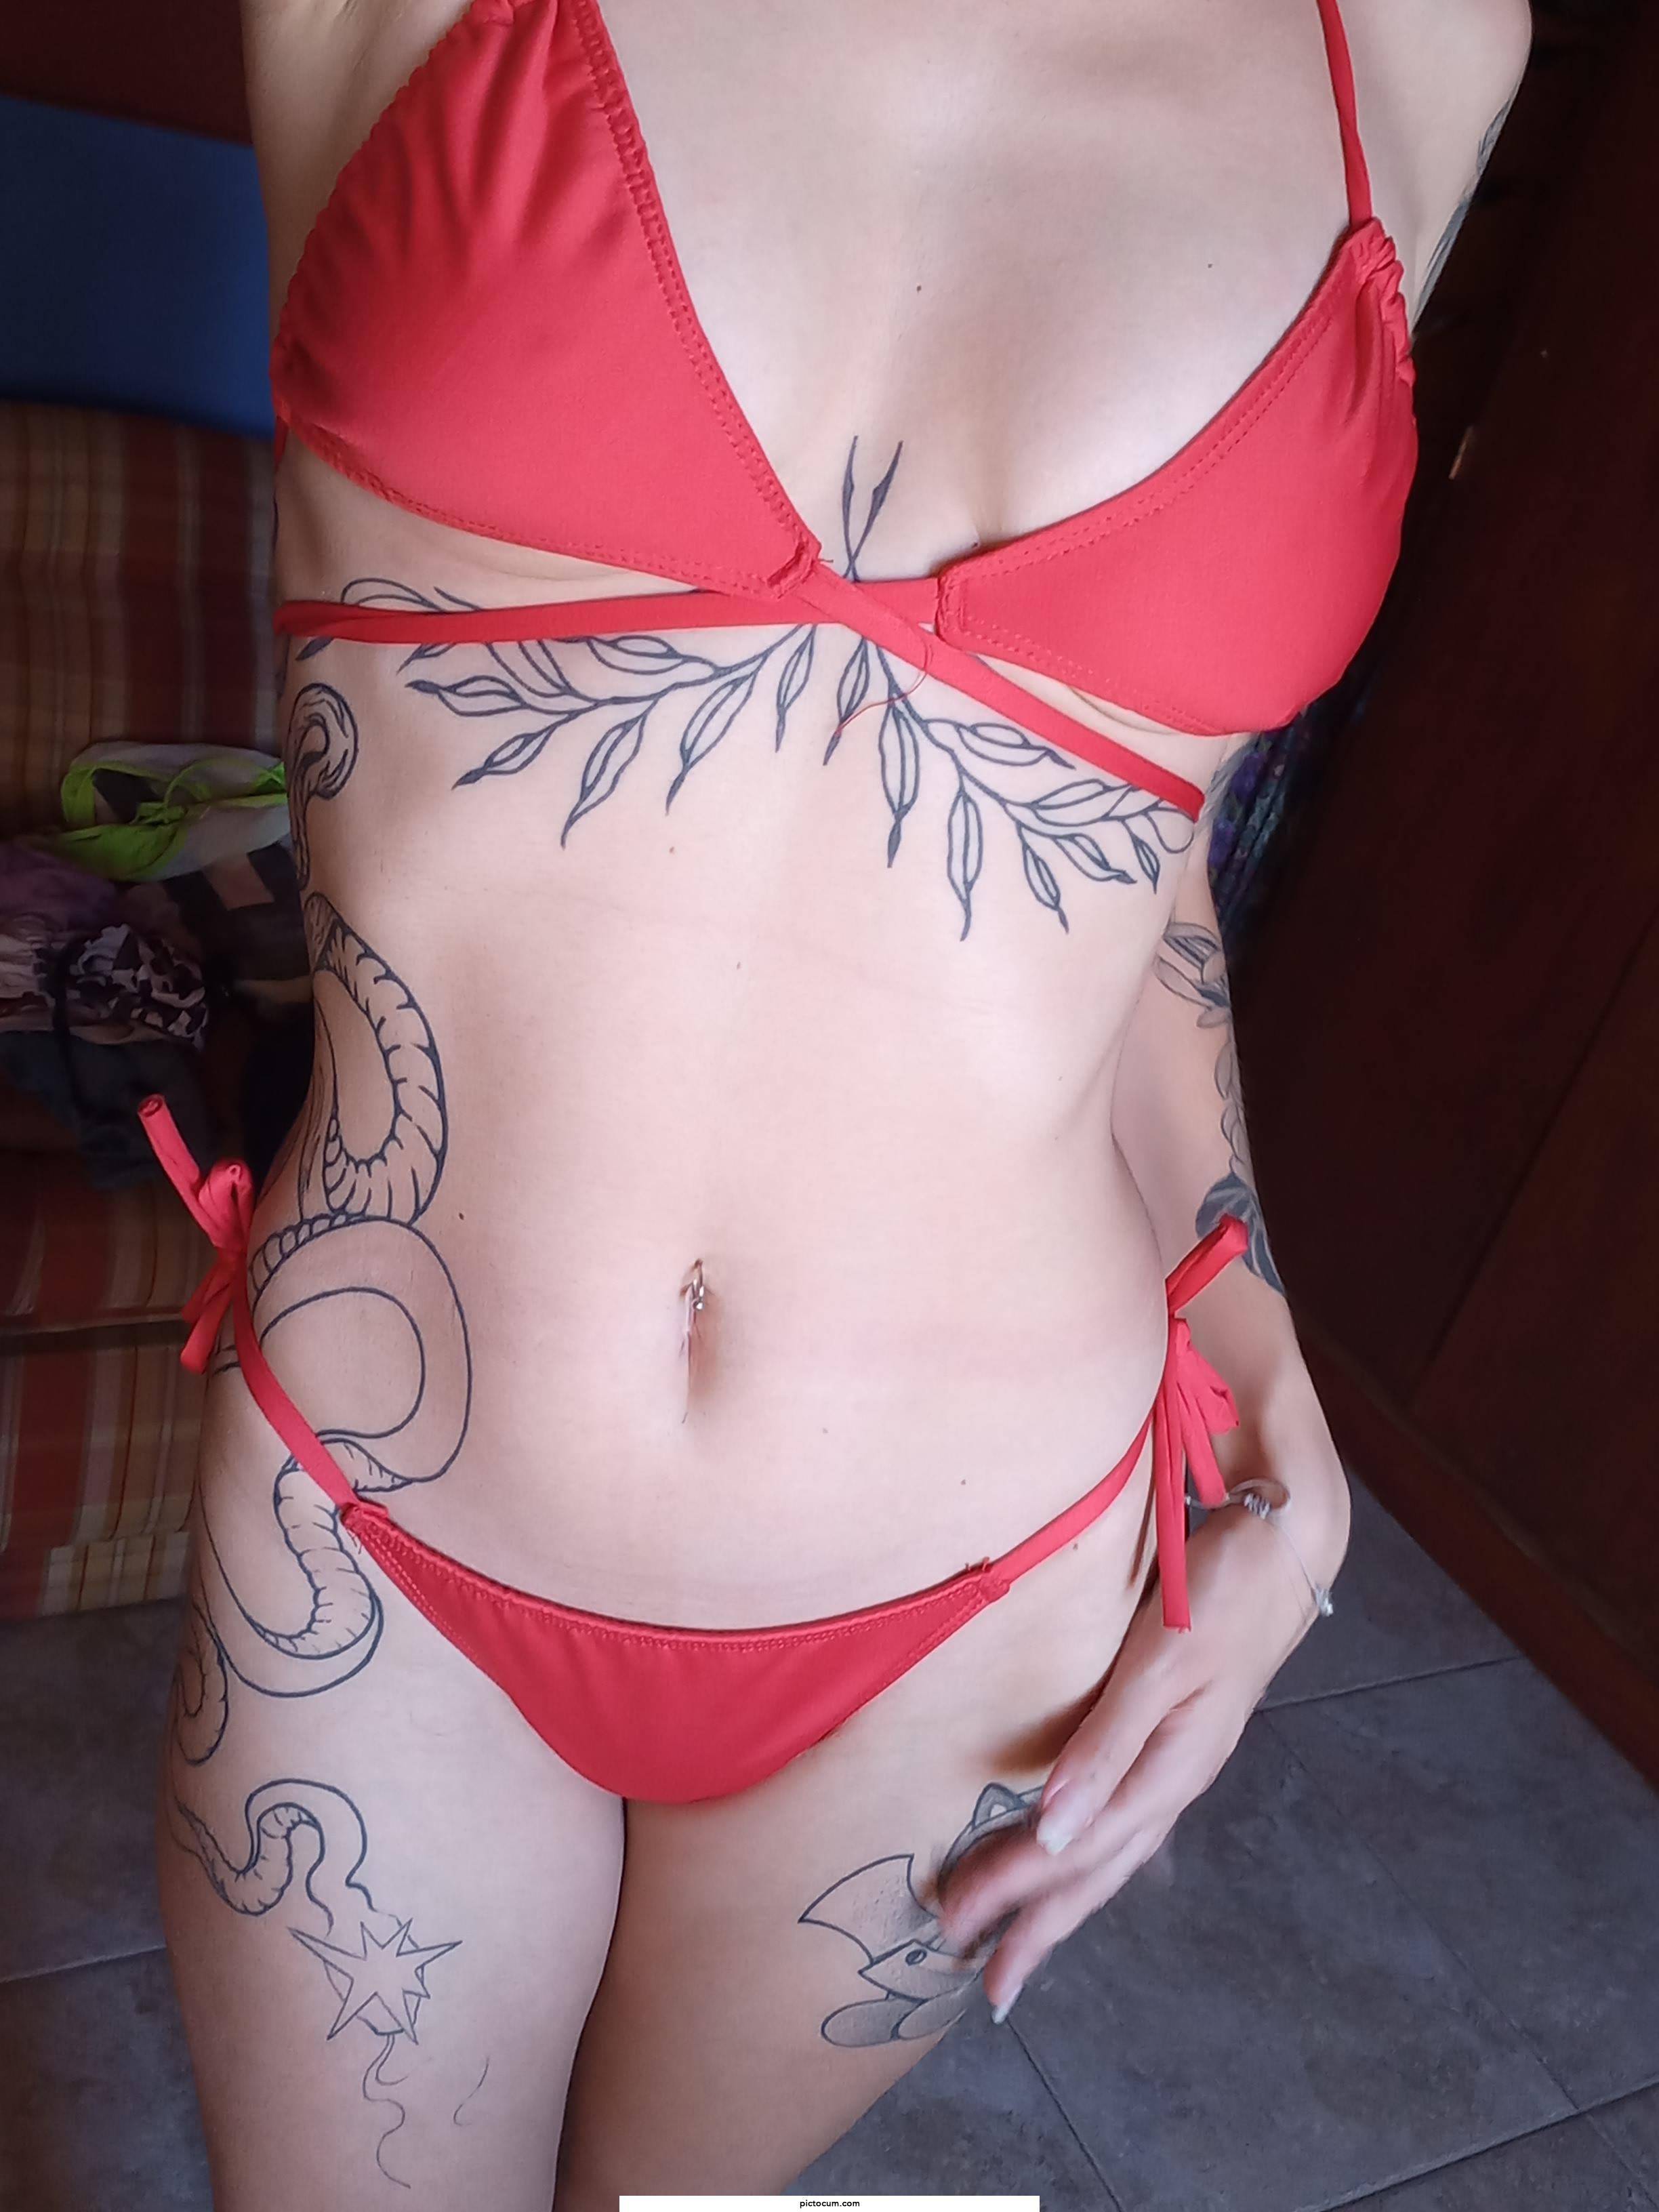 does red look good on me ?